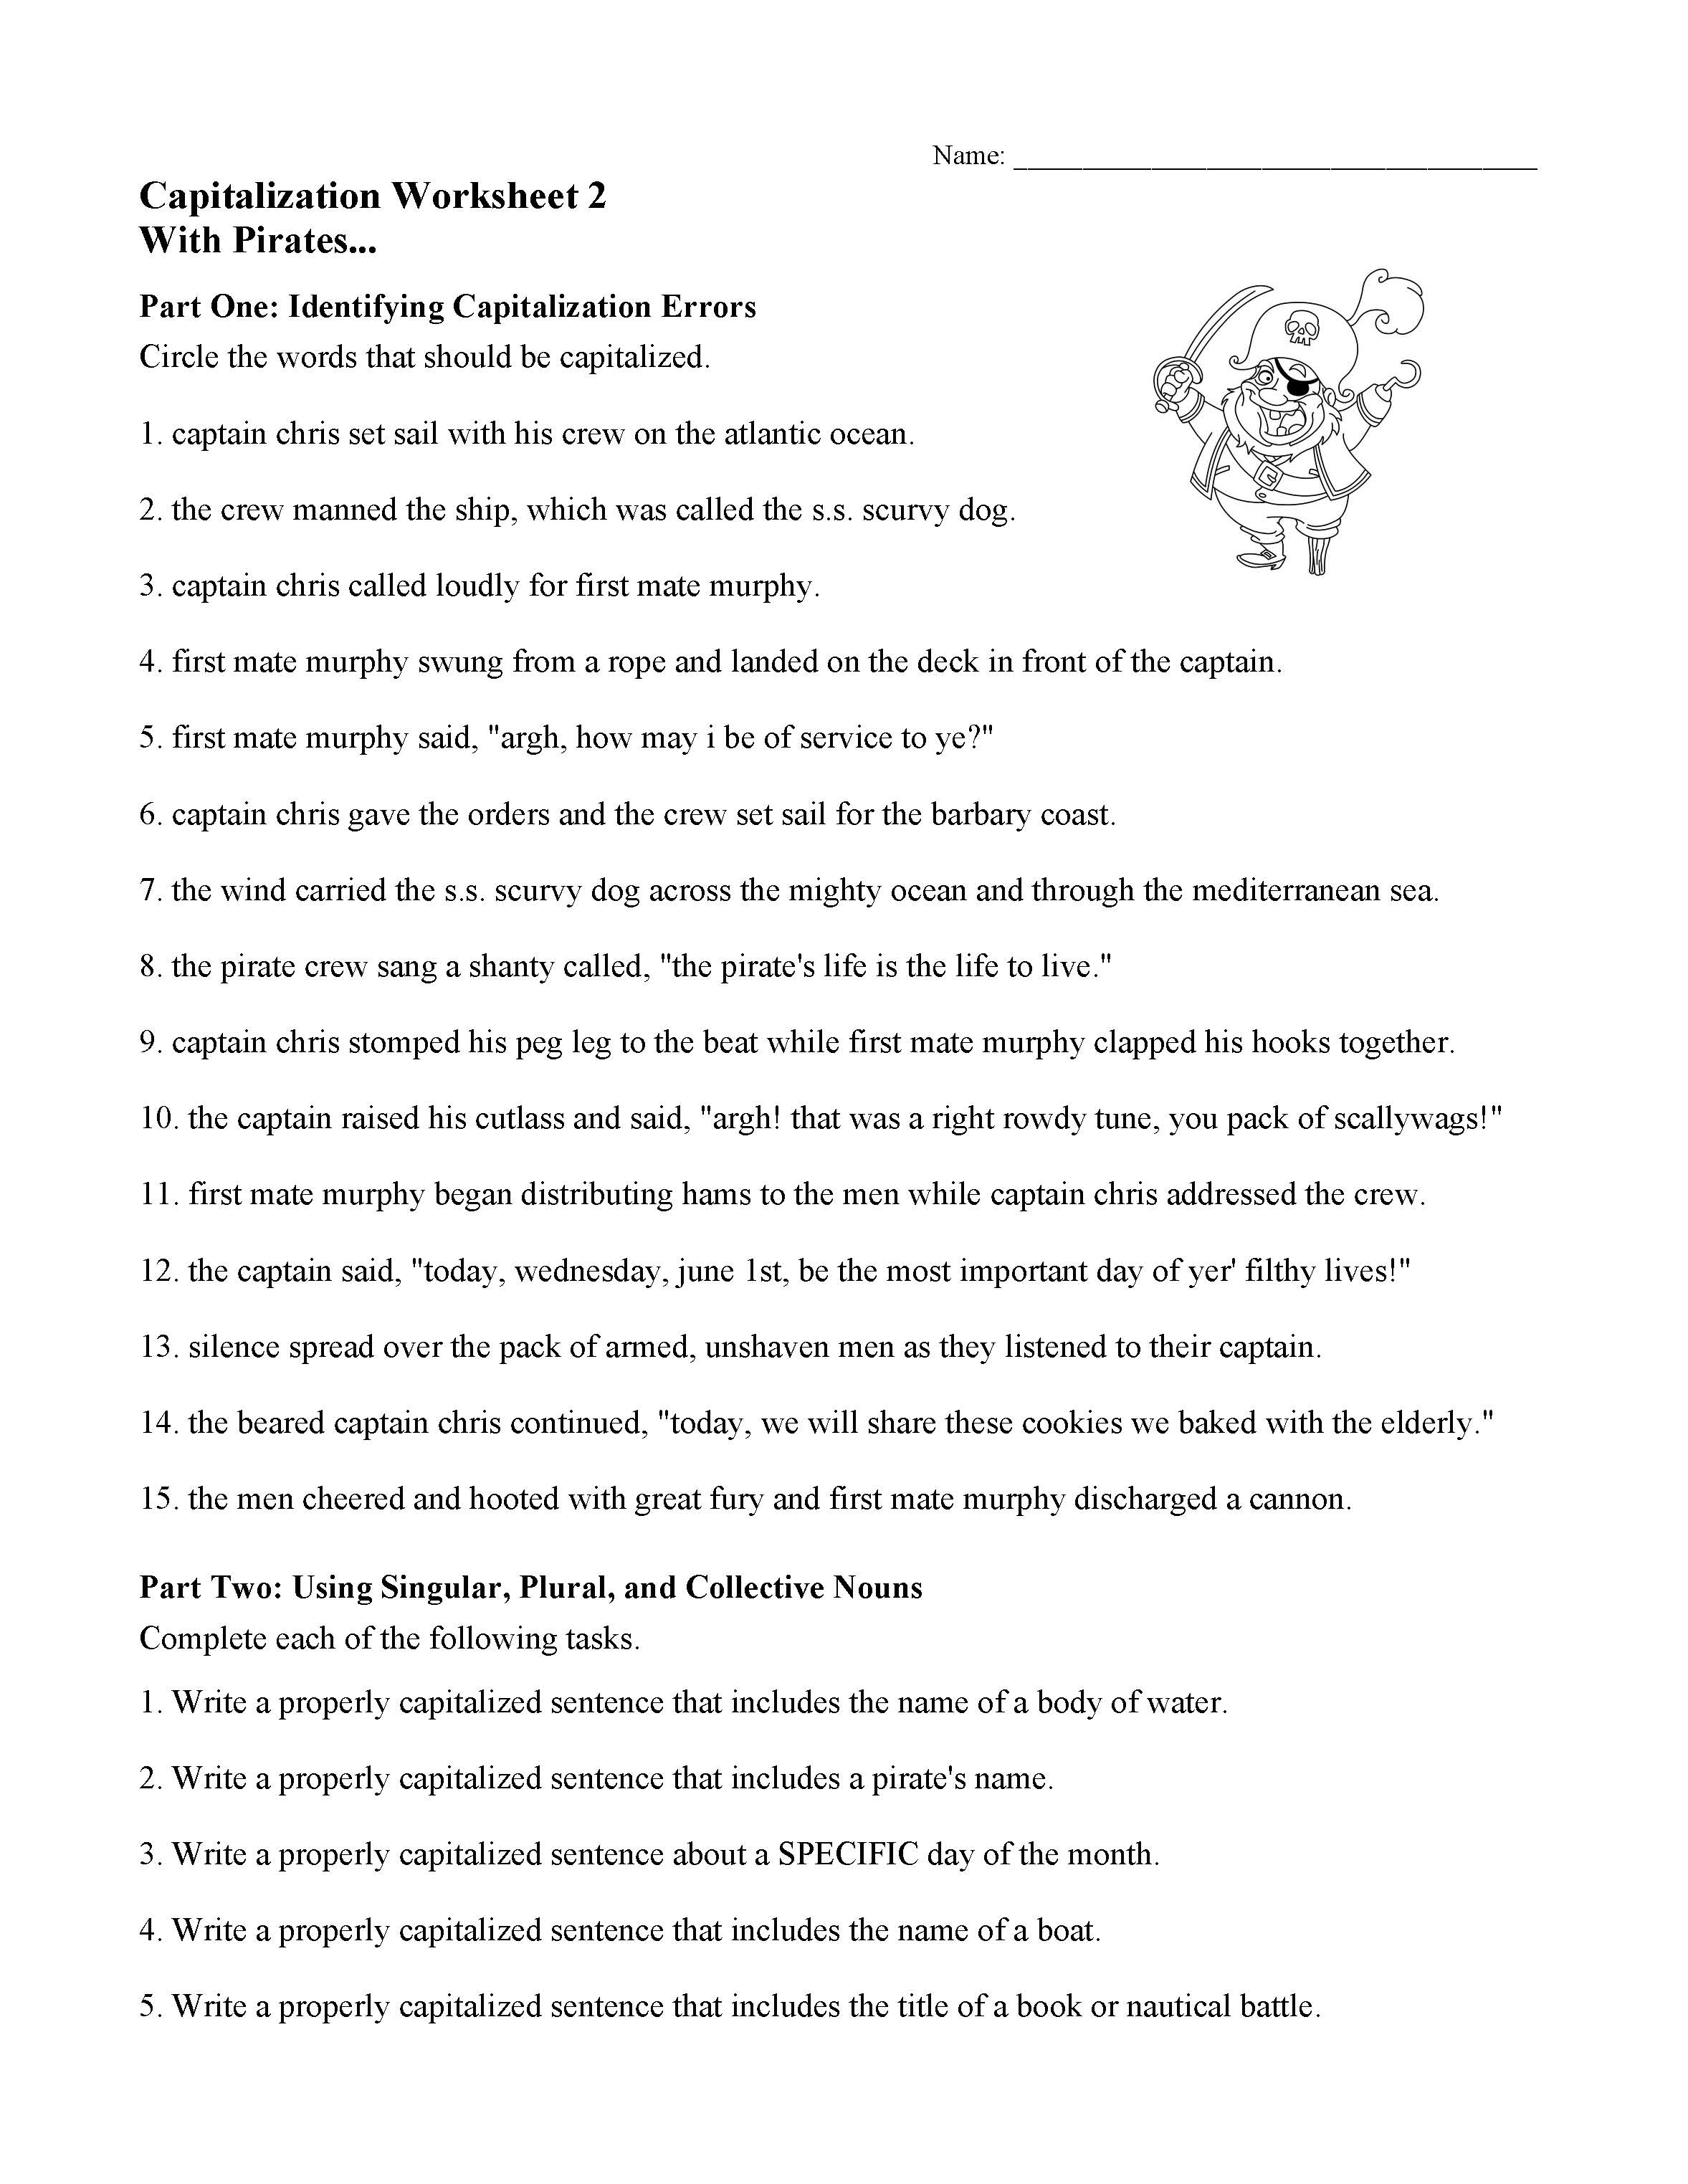 This is a preview image of Capitalization Worksheet 2. Click on it to enlarge it or view the source file.